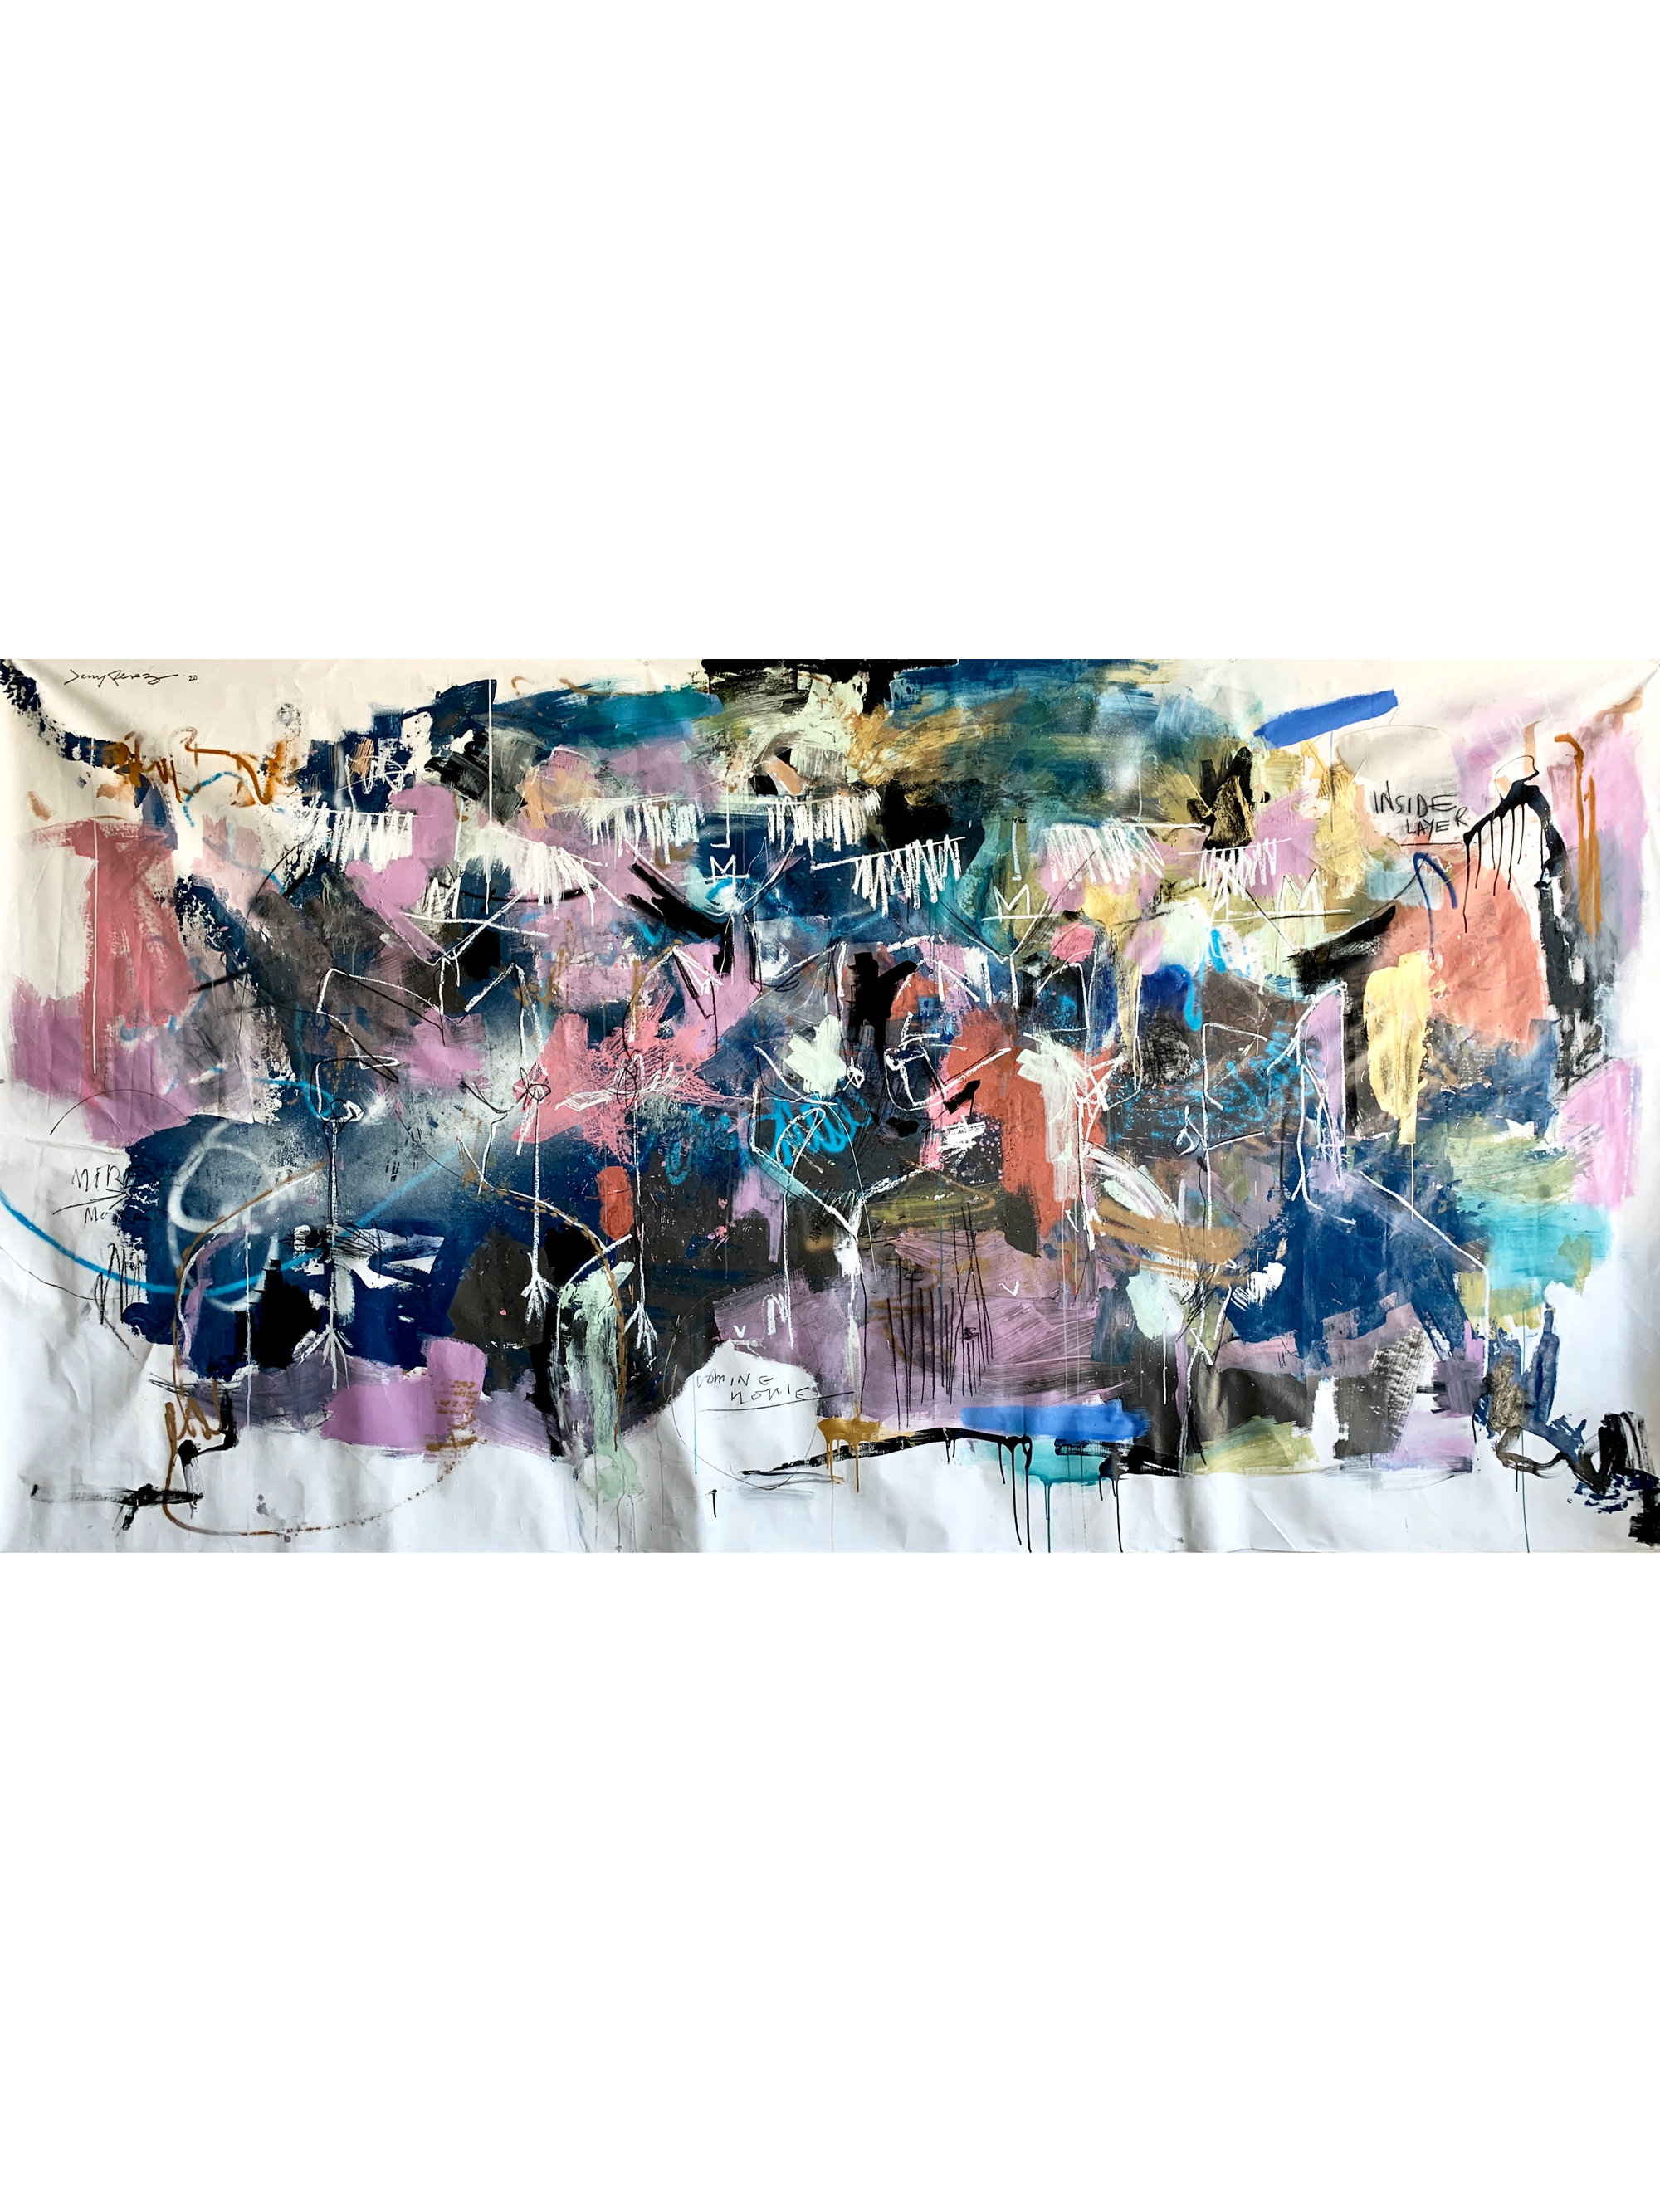 When the World Changed 7' x 9' - 2020 - Acrylic, aerosol and charcoal on canvas